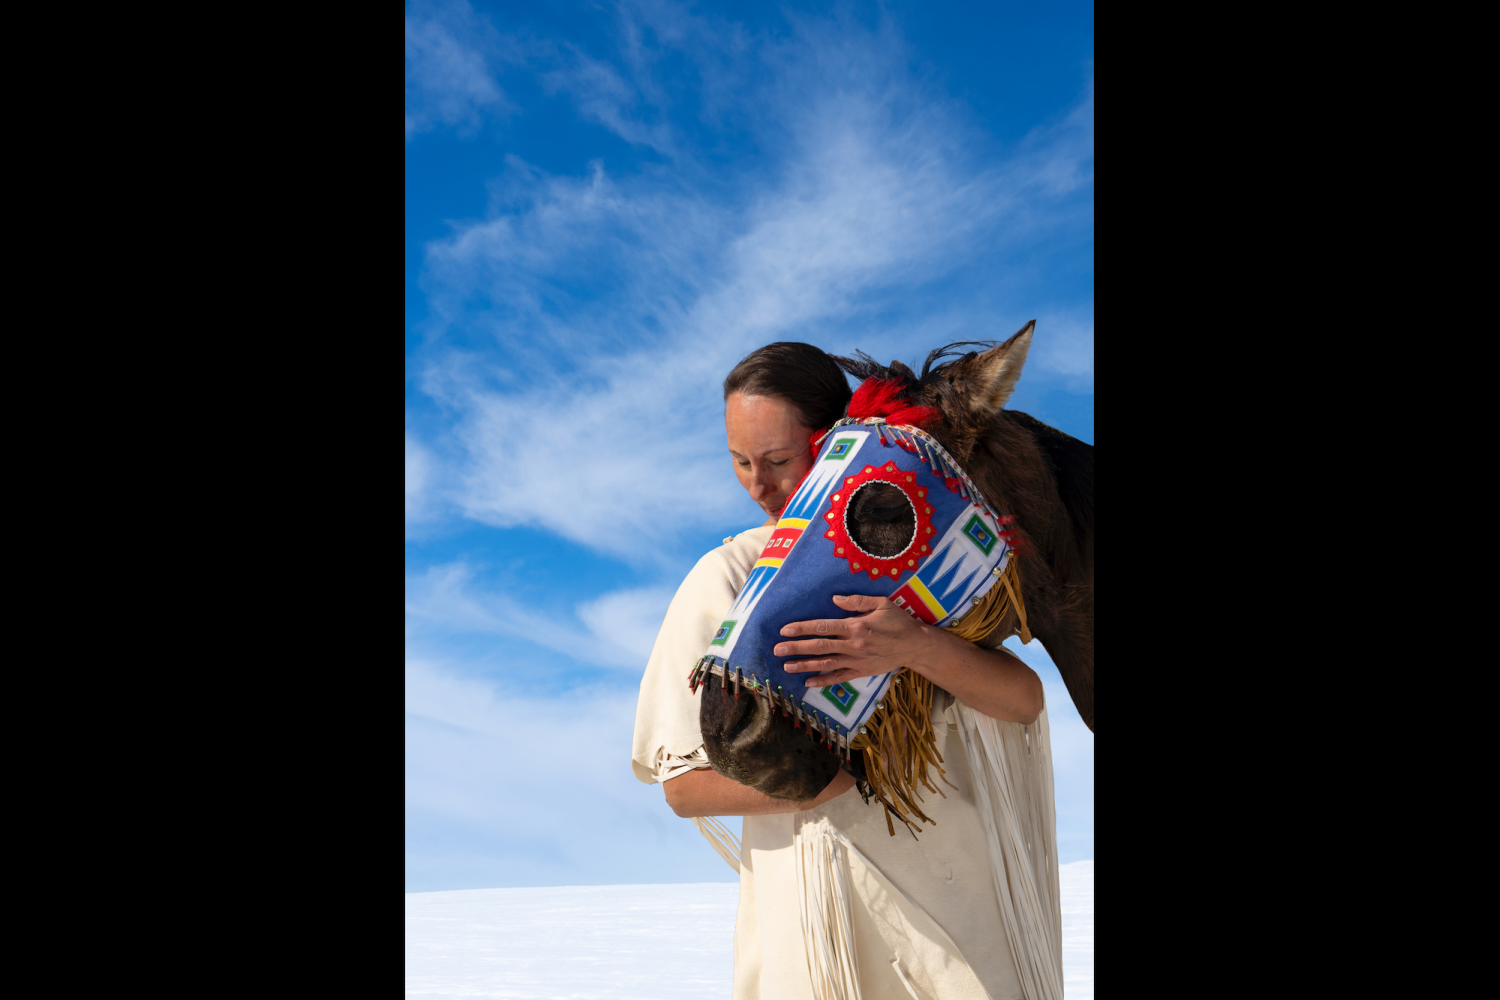 Woman stands with a horse wearing a colorful head covering